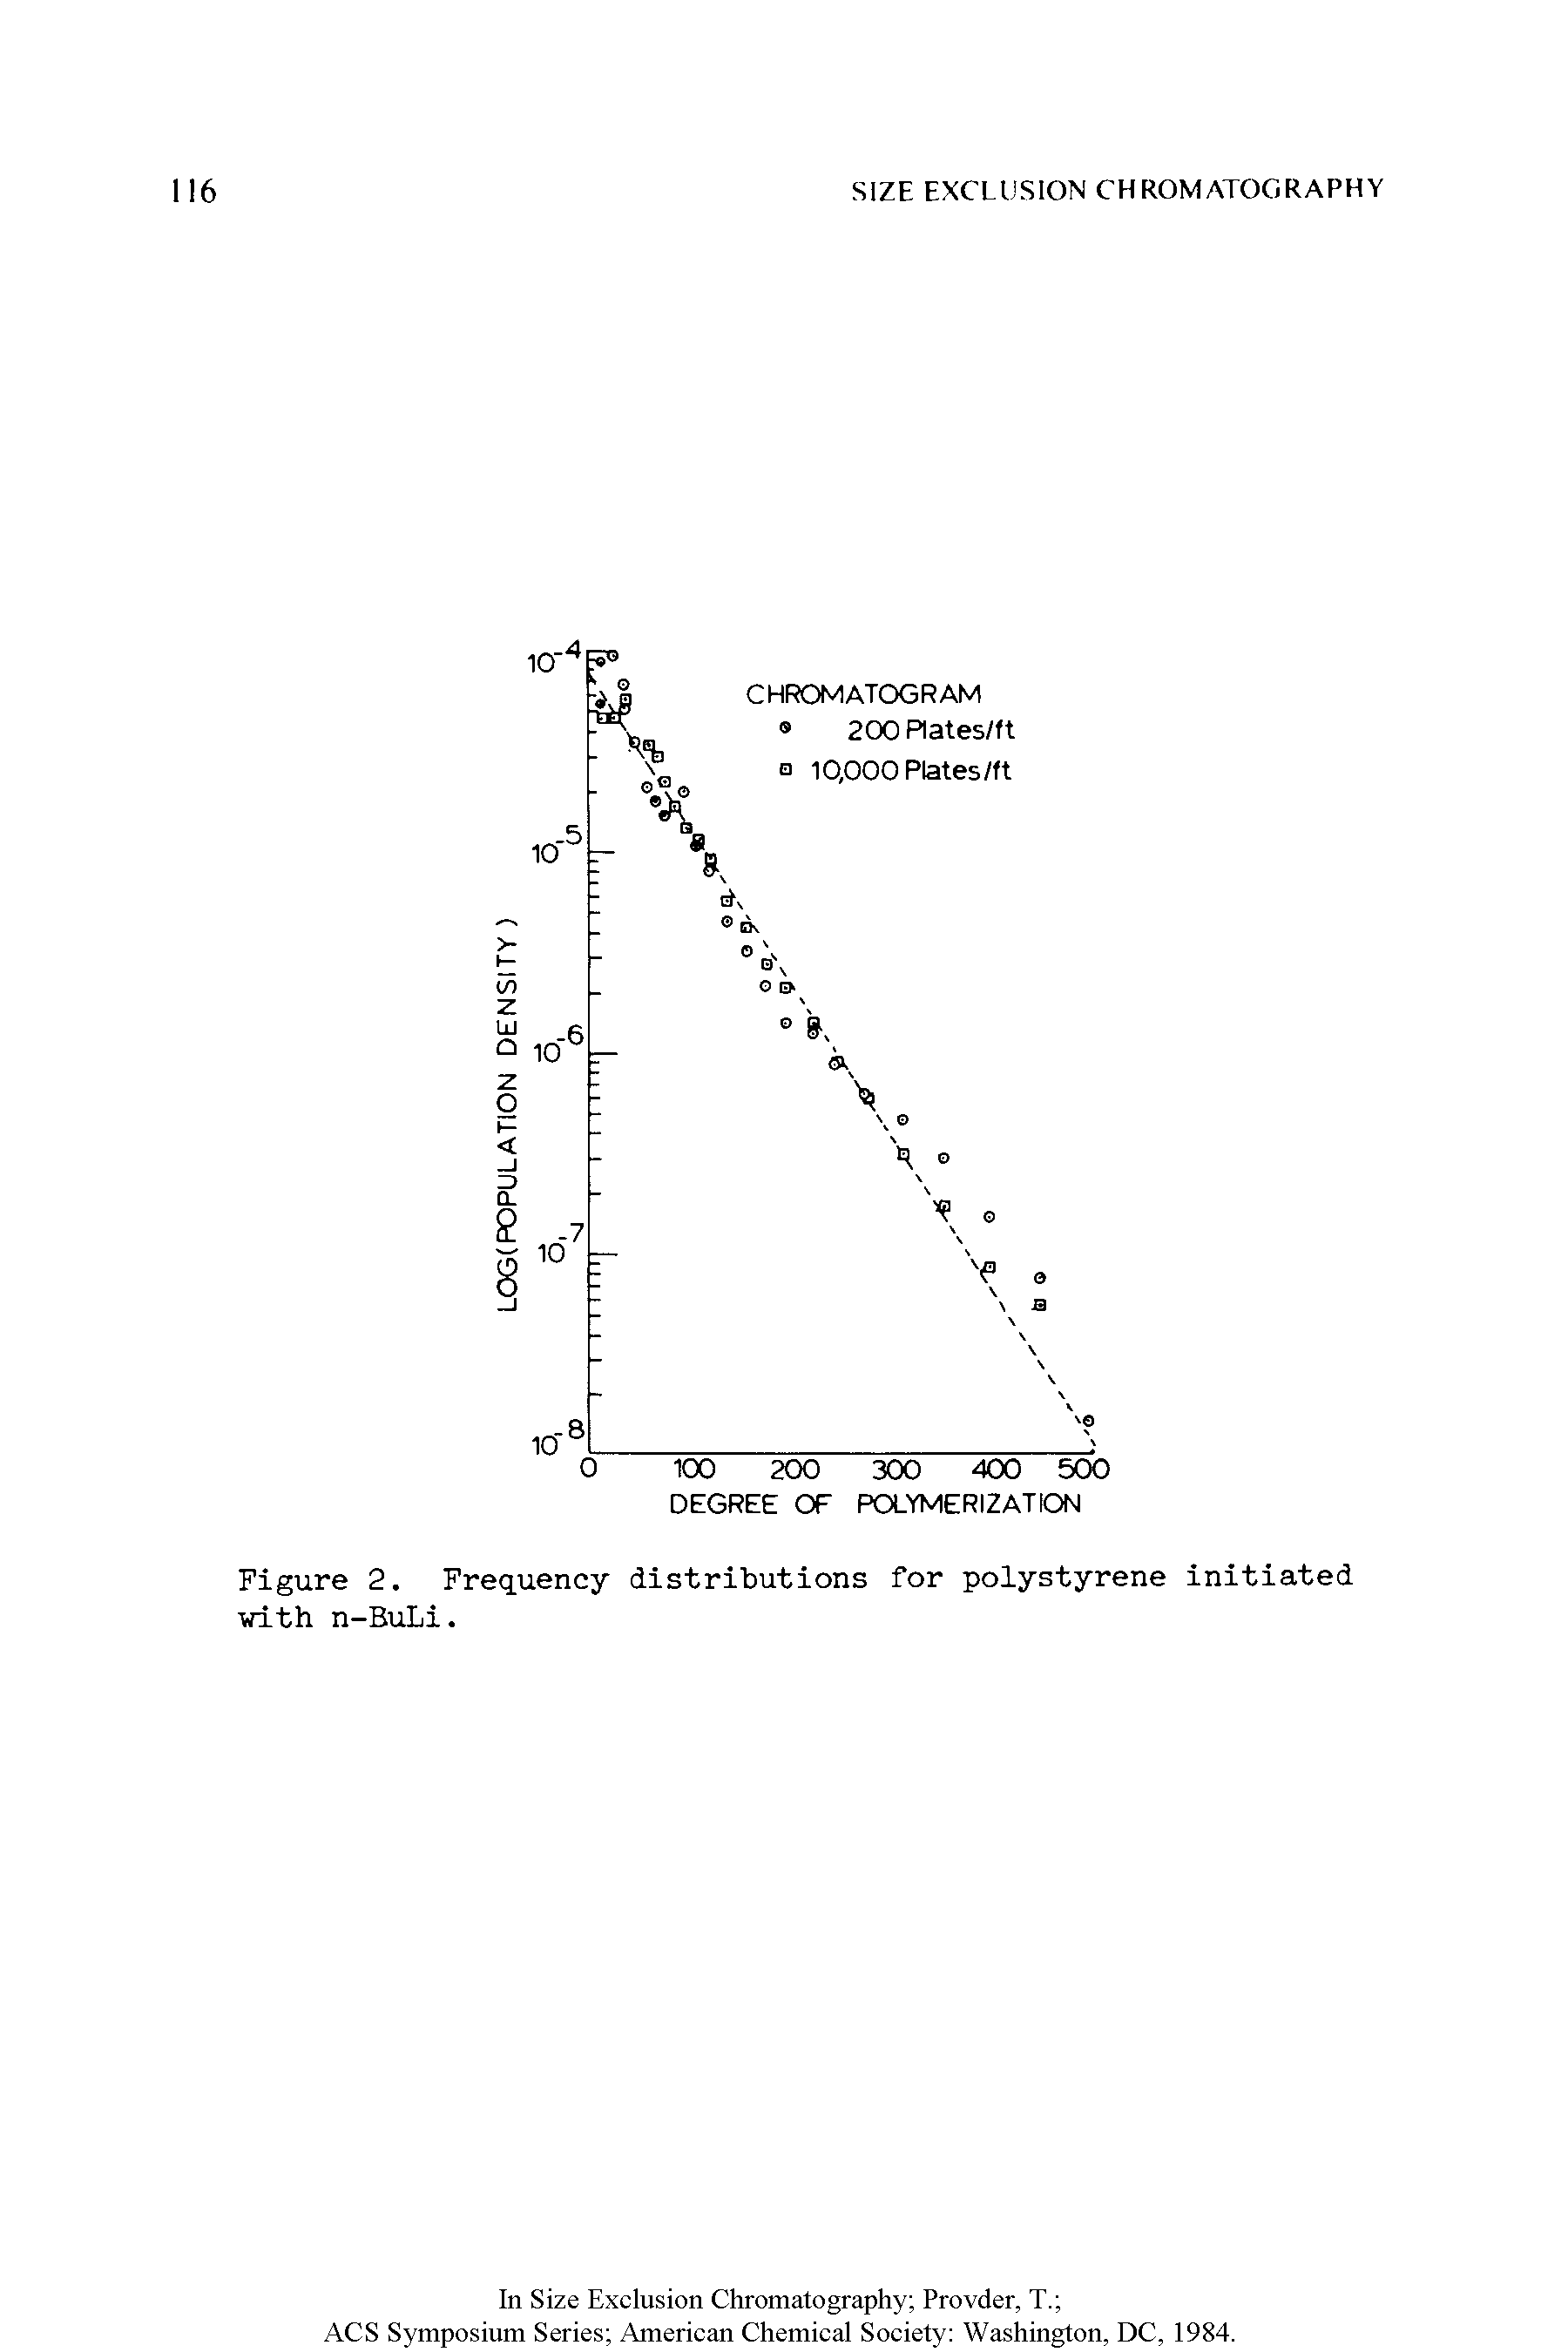 Figure 2. Frequency distributions for polystyrene initiated with n-BuLi.